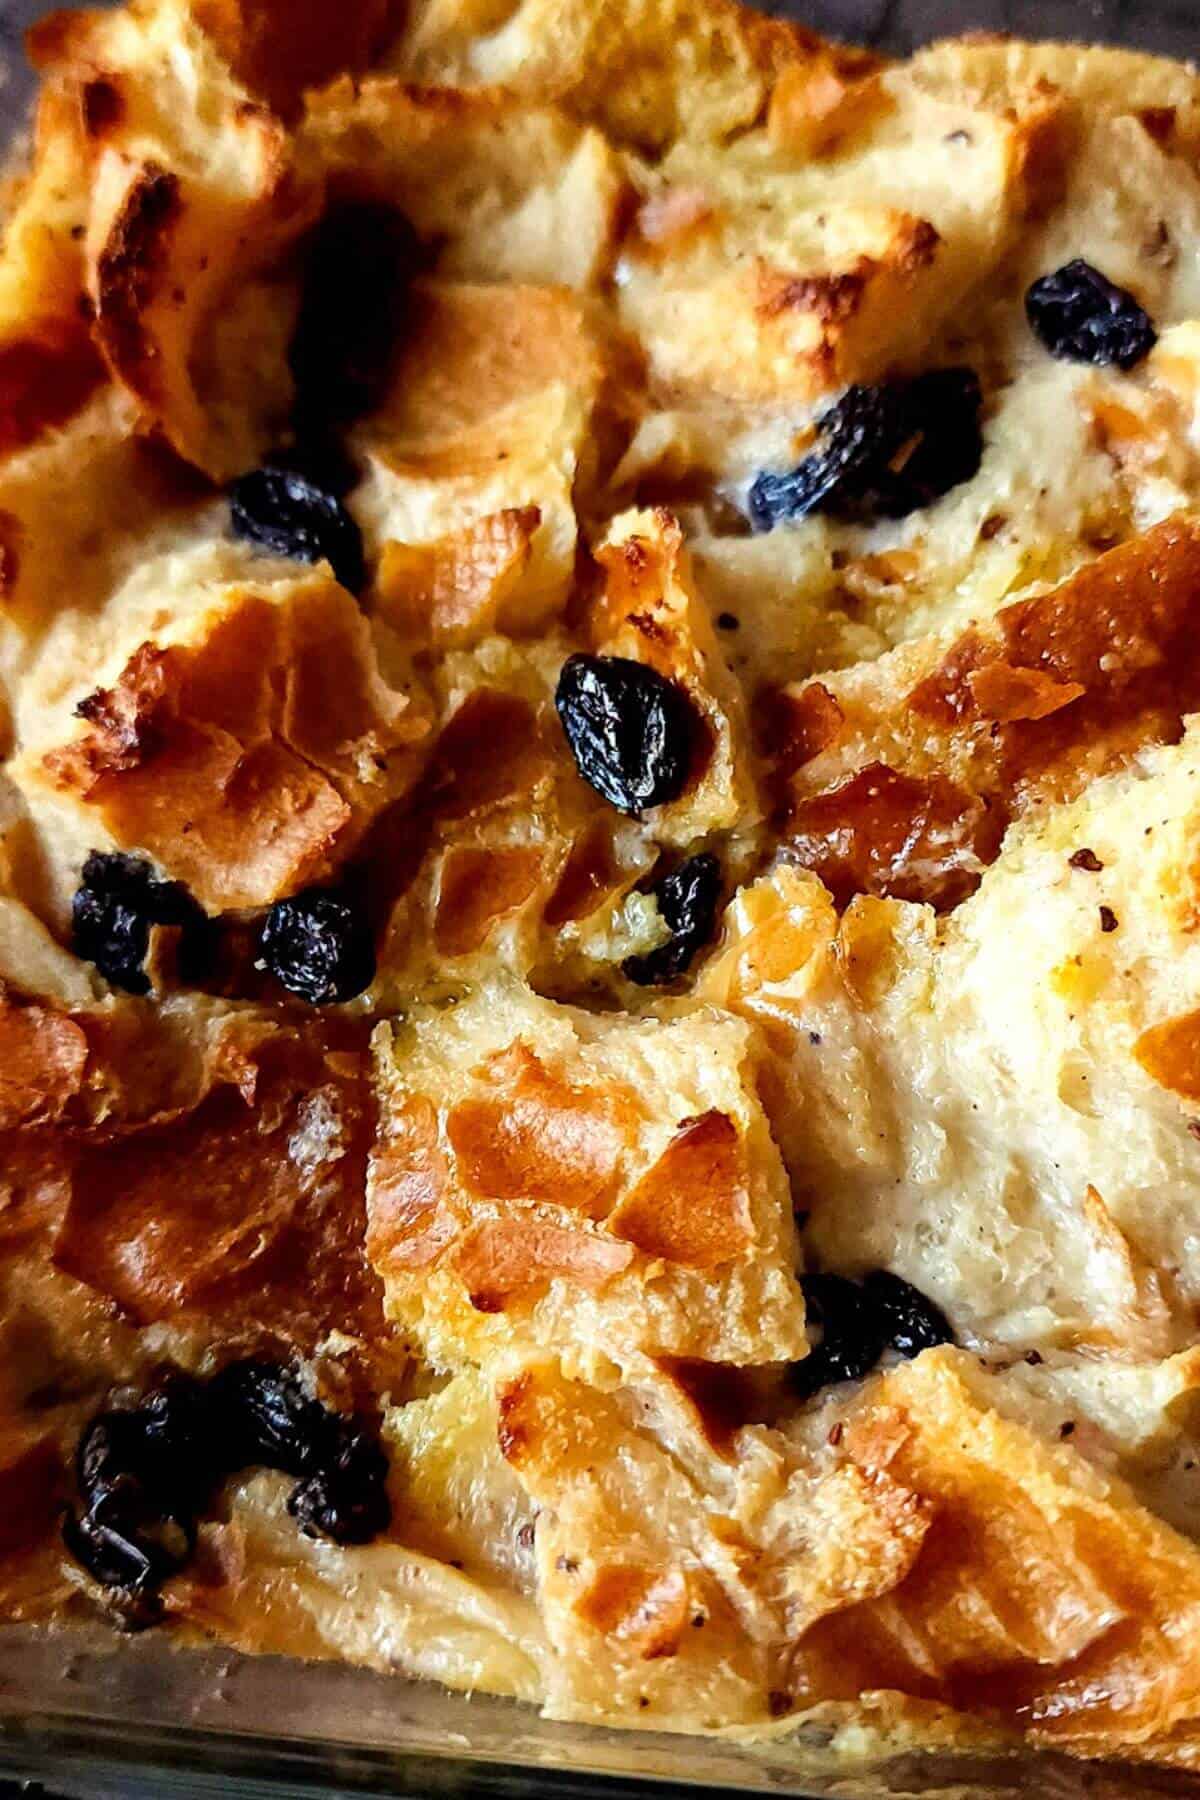 Eggless bread pudding with black raisins in a baking dish.